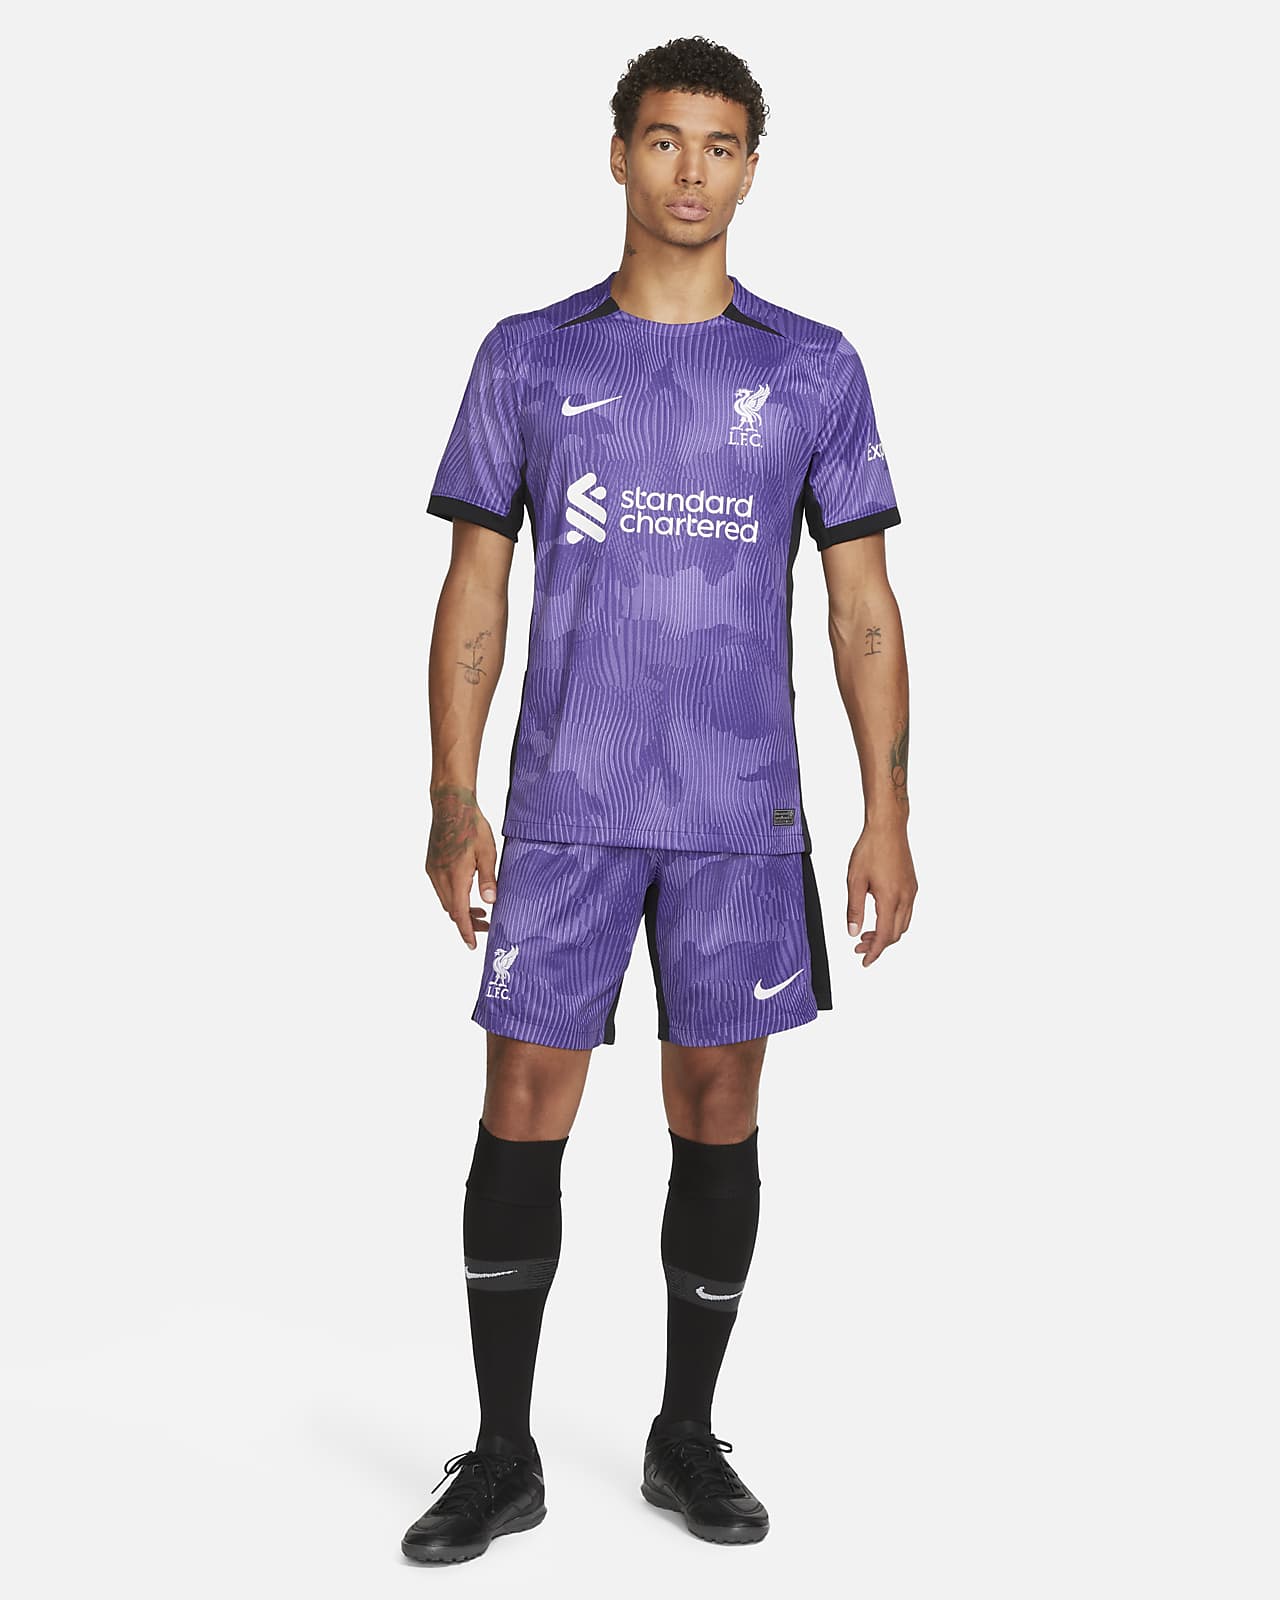 fc liverpool maillot